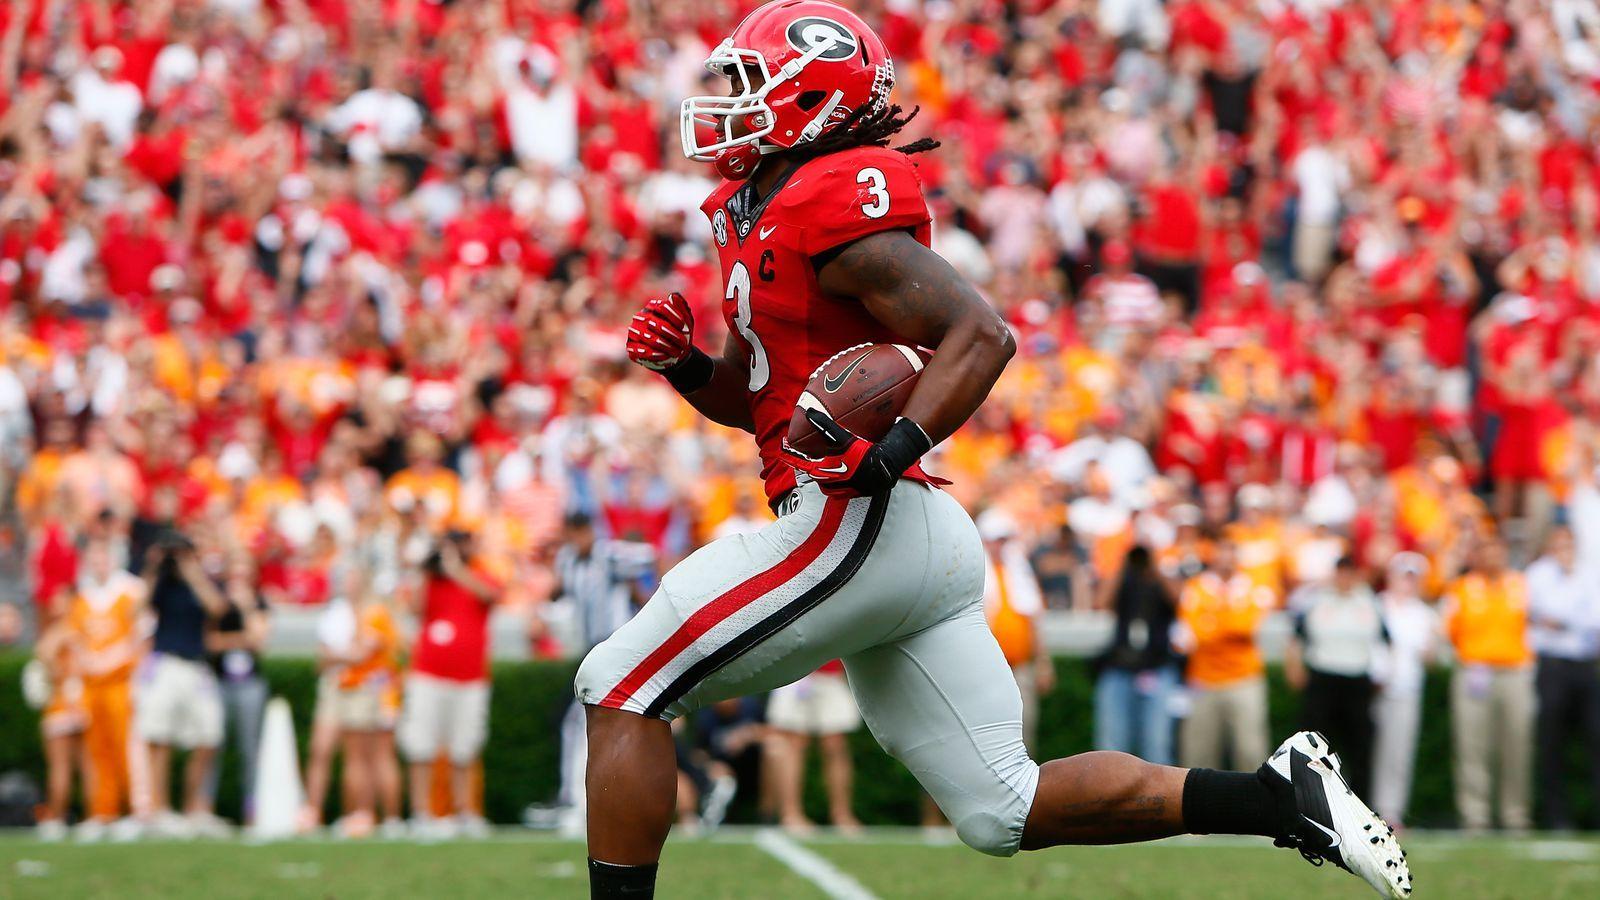 Would you rather draft Todd Gurley or Melvin Gordon?